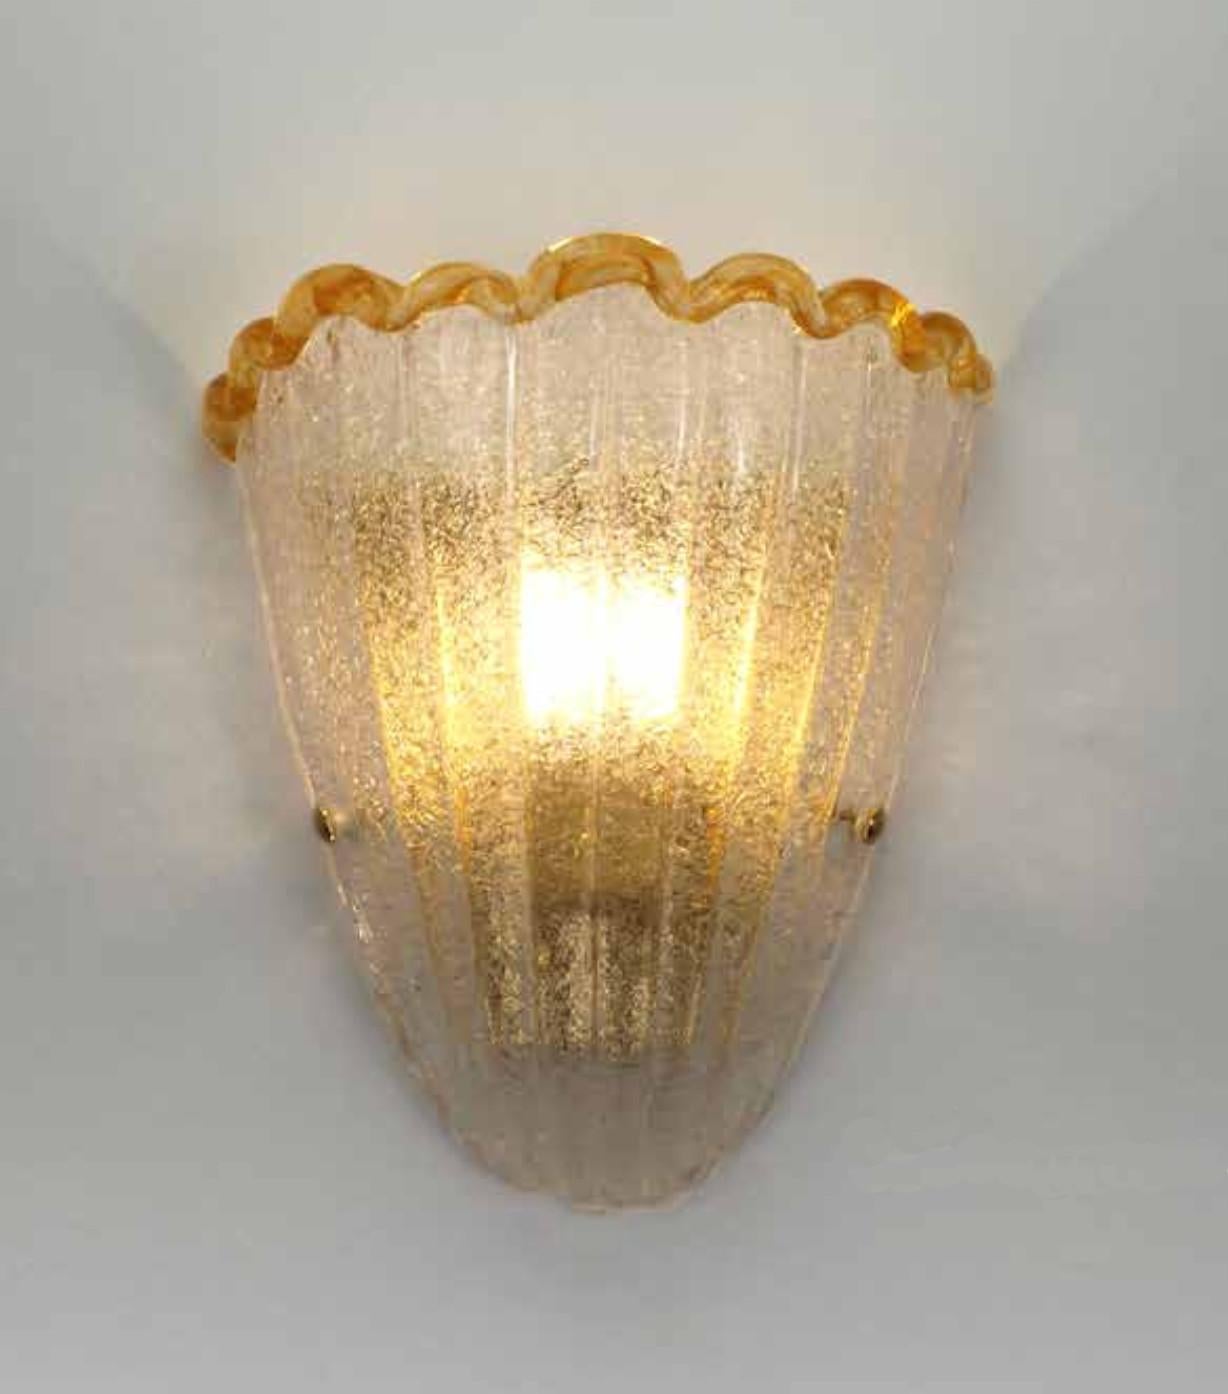 Italian wall light with a Murano glass shield hand blown in Graniglia technique to produce granular textured effect with amber colored rim, mounted on gold plated finish frame / Made in Italy
Measures: Height 10 inches, width 10 inches, depth 6